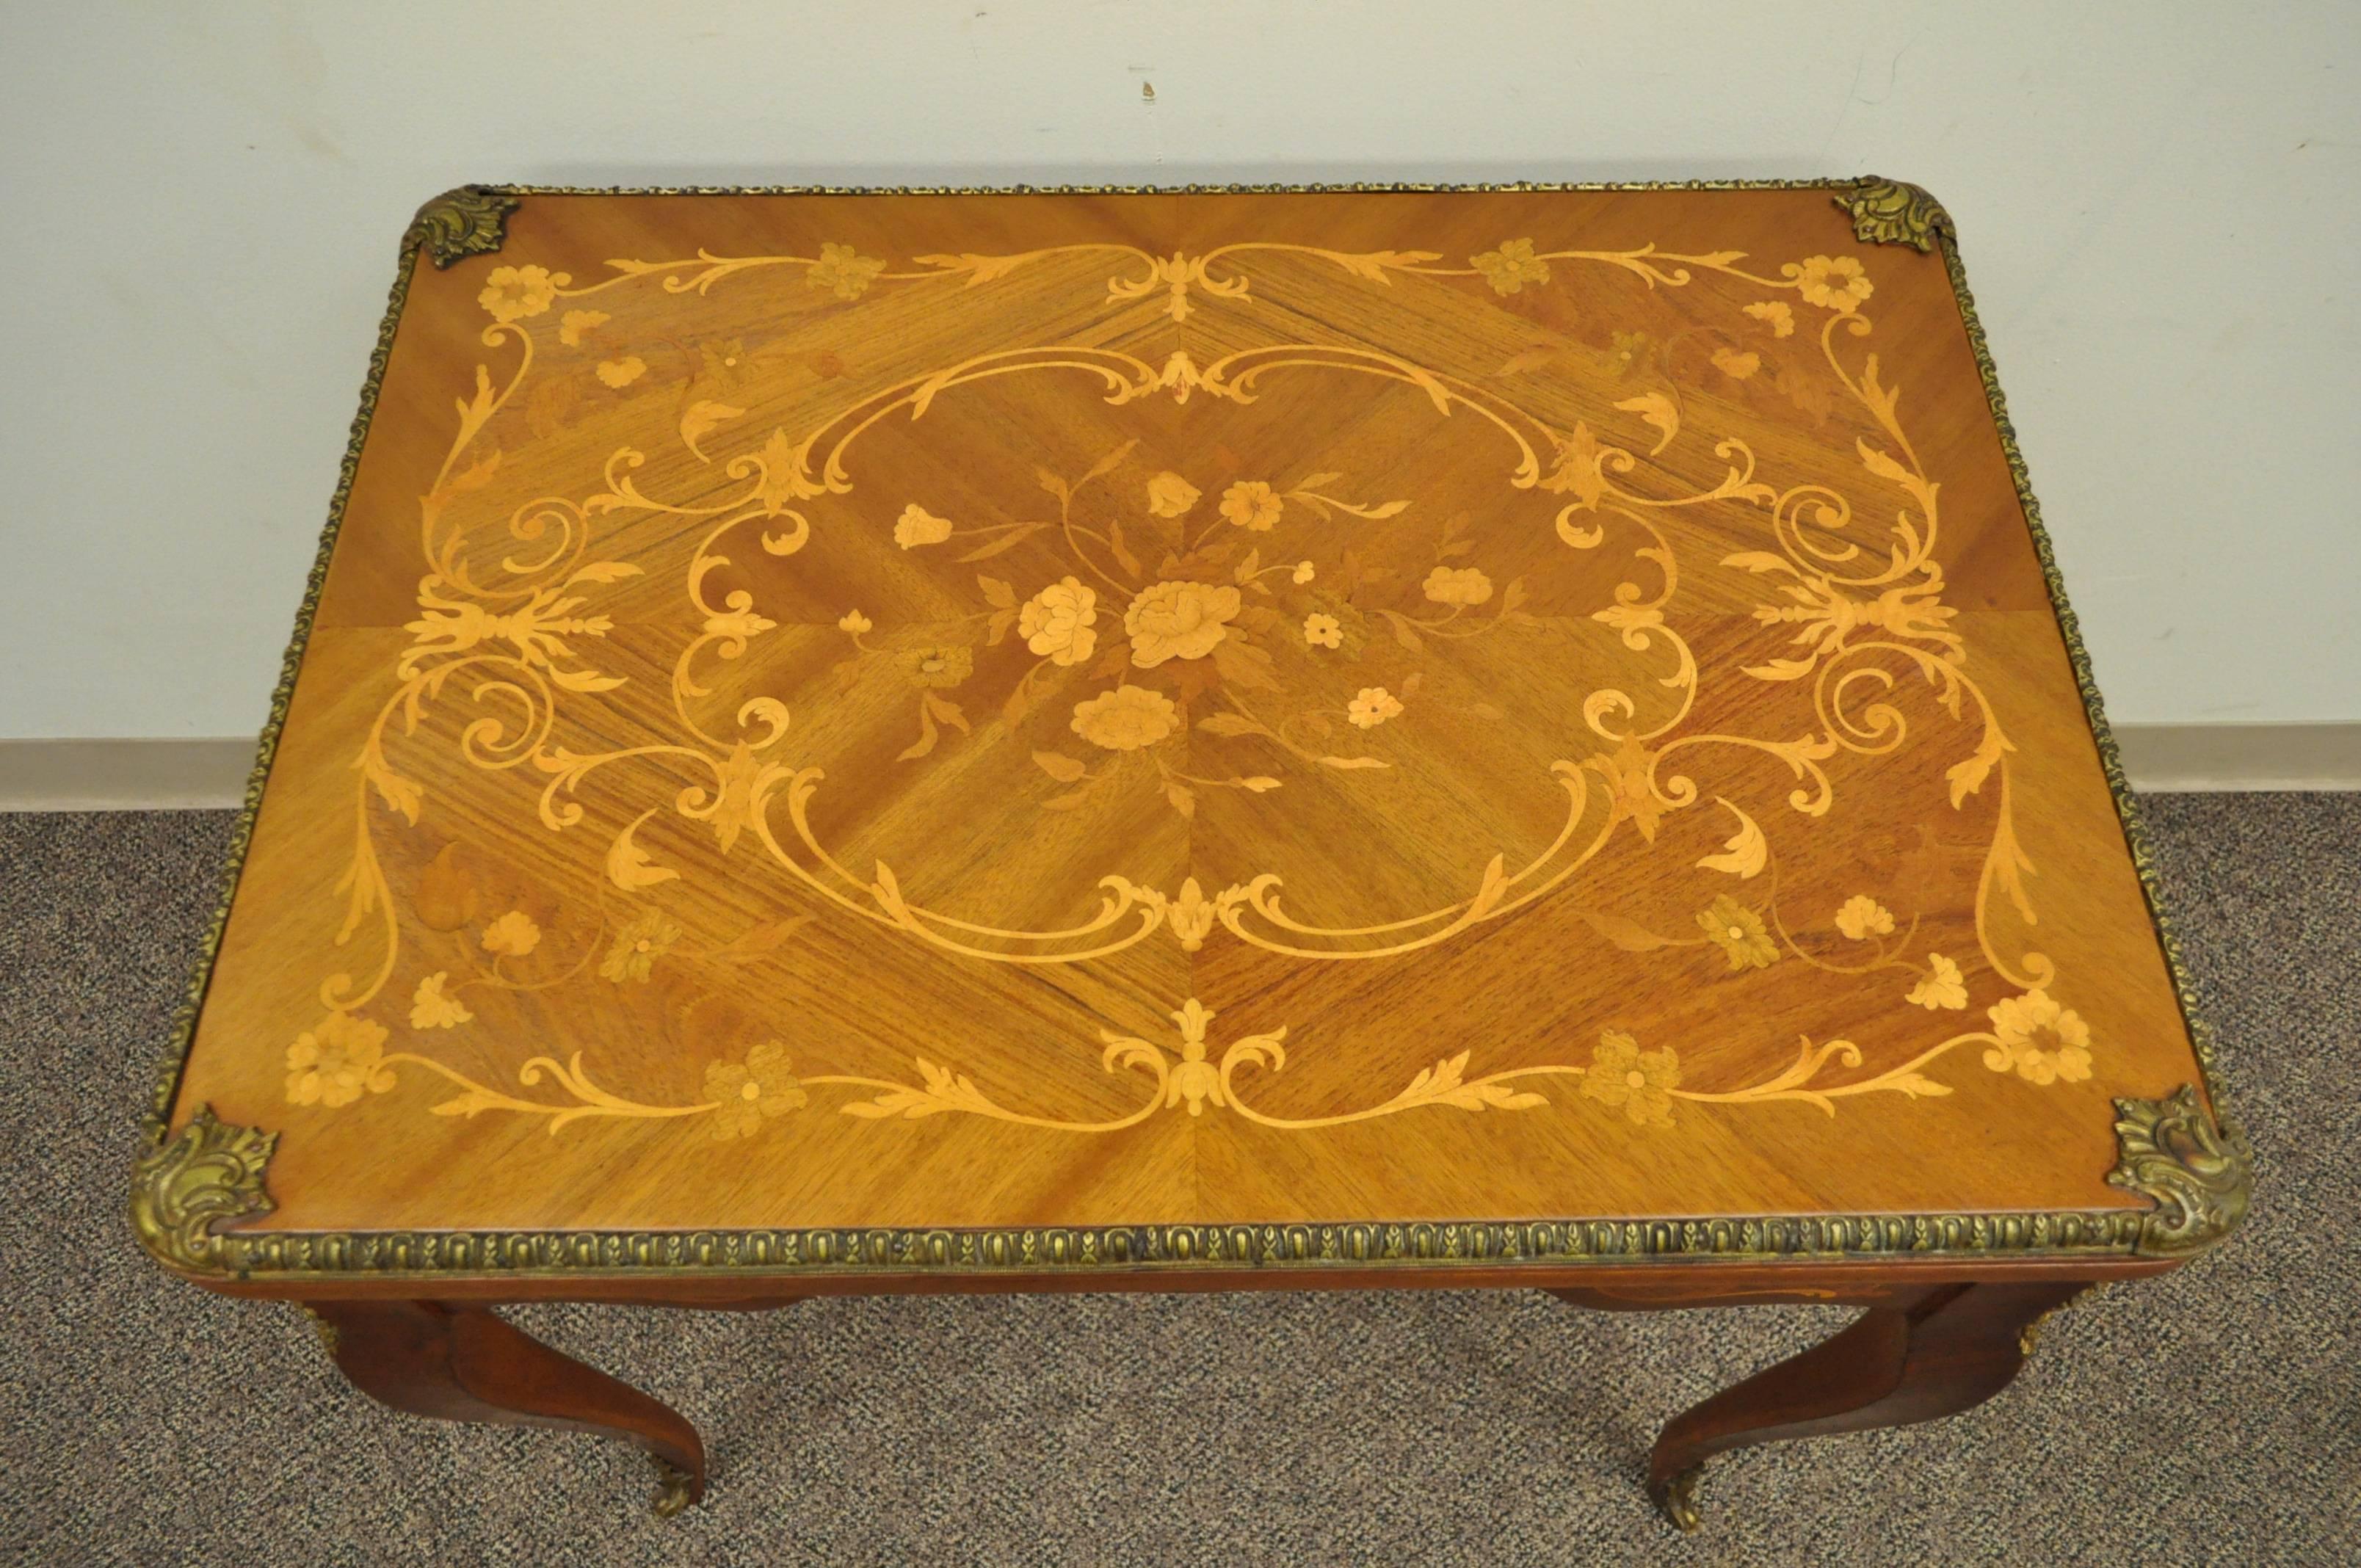 A beautiful French Louis XV Style marquetry inlaid flip top game table. The table has a wonderful floral inlaid pattern on the top and all sides, cast bronze mounts, and a single dovetailed drawer.

Measurements below are of the table top closed.